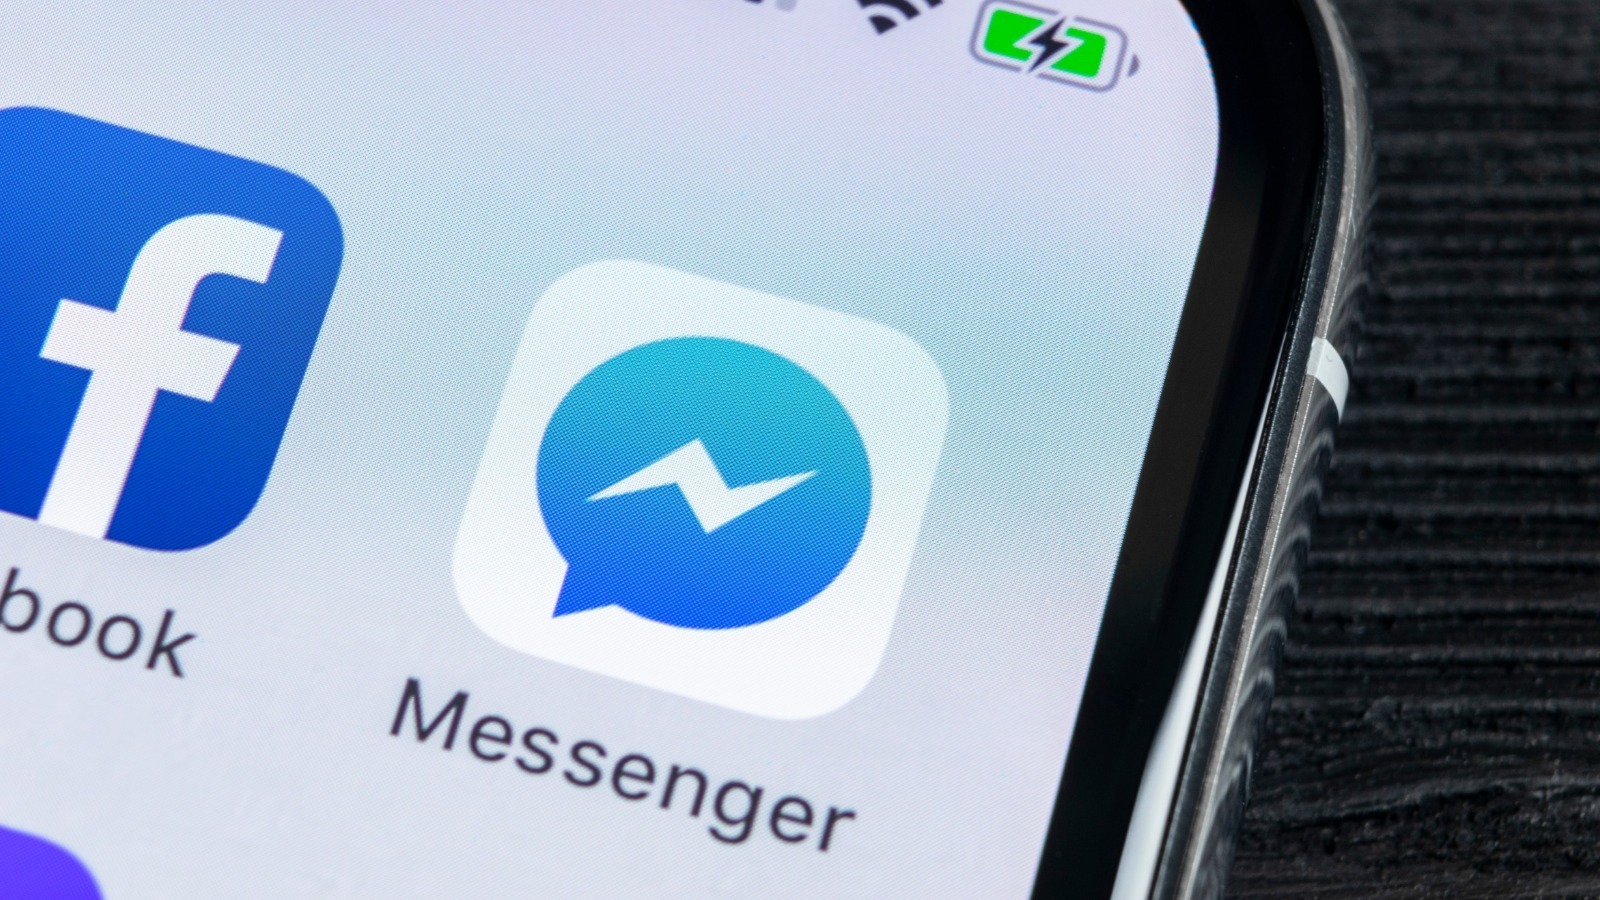 New Facebook Messenger Features Let You Ping Everyone Or Alert No One thumbnail